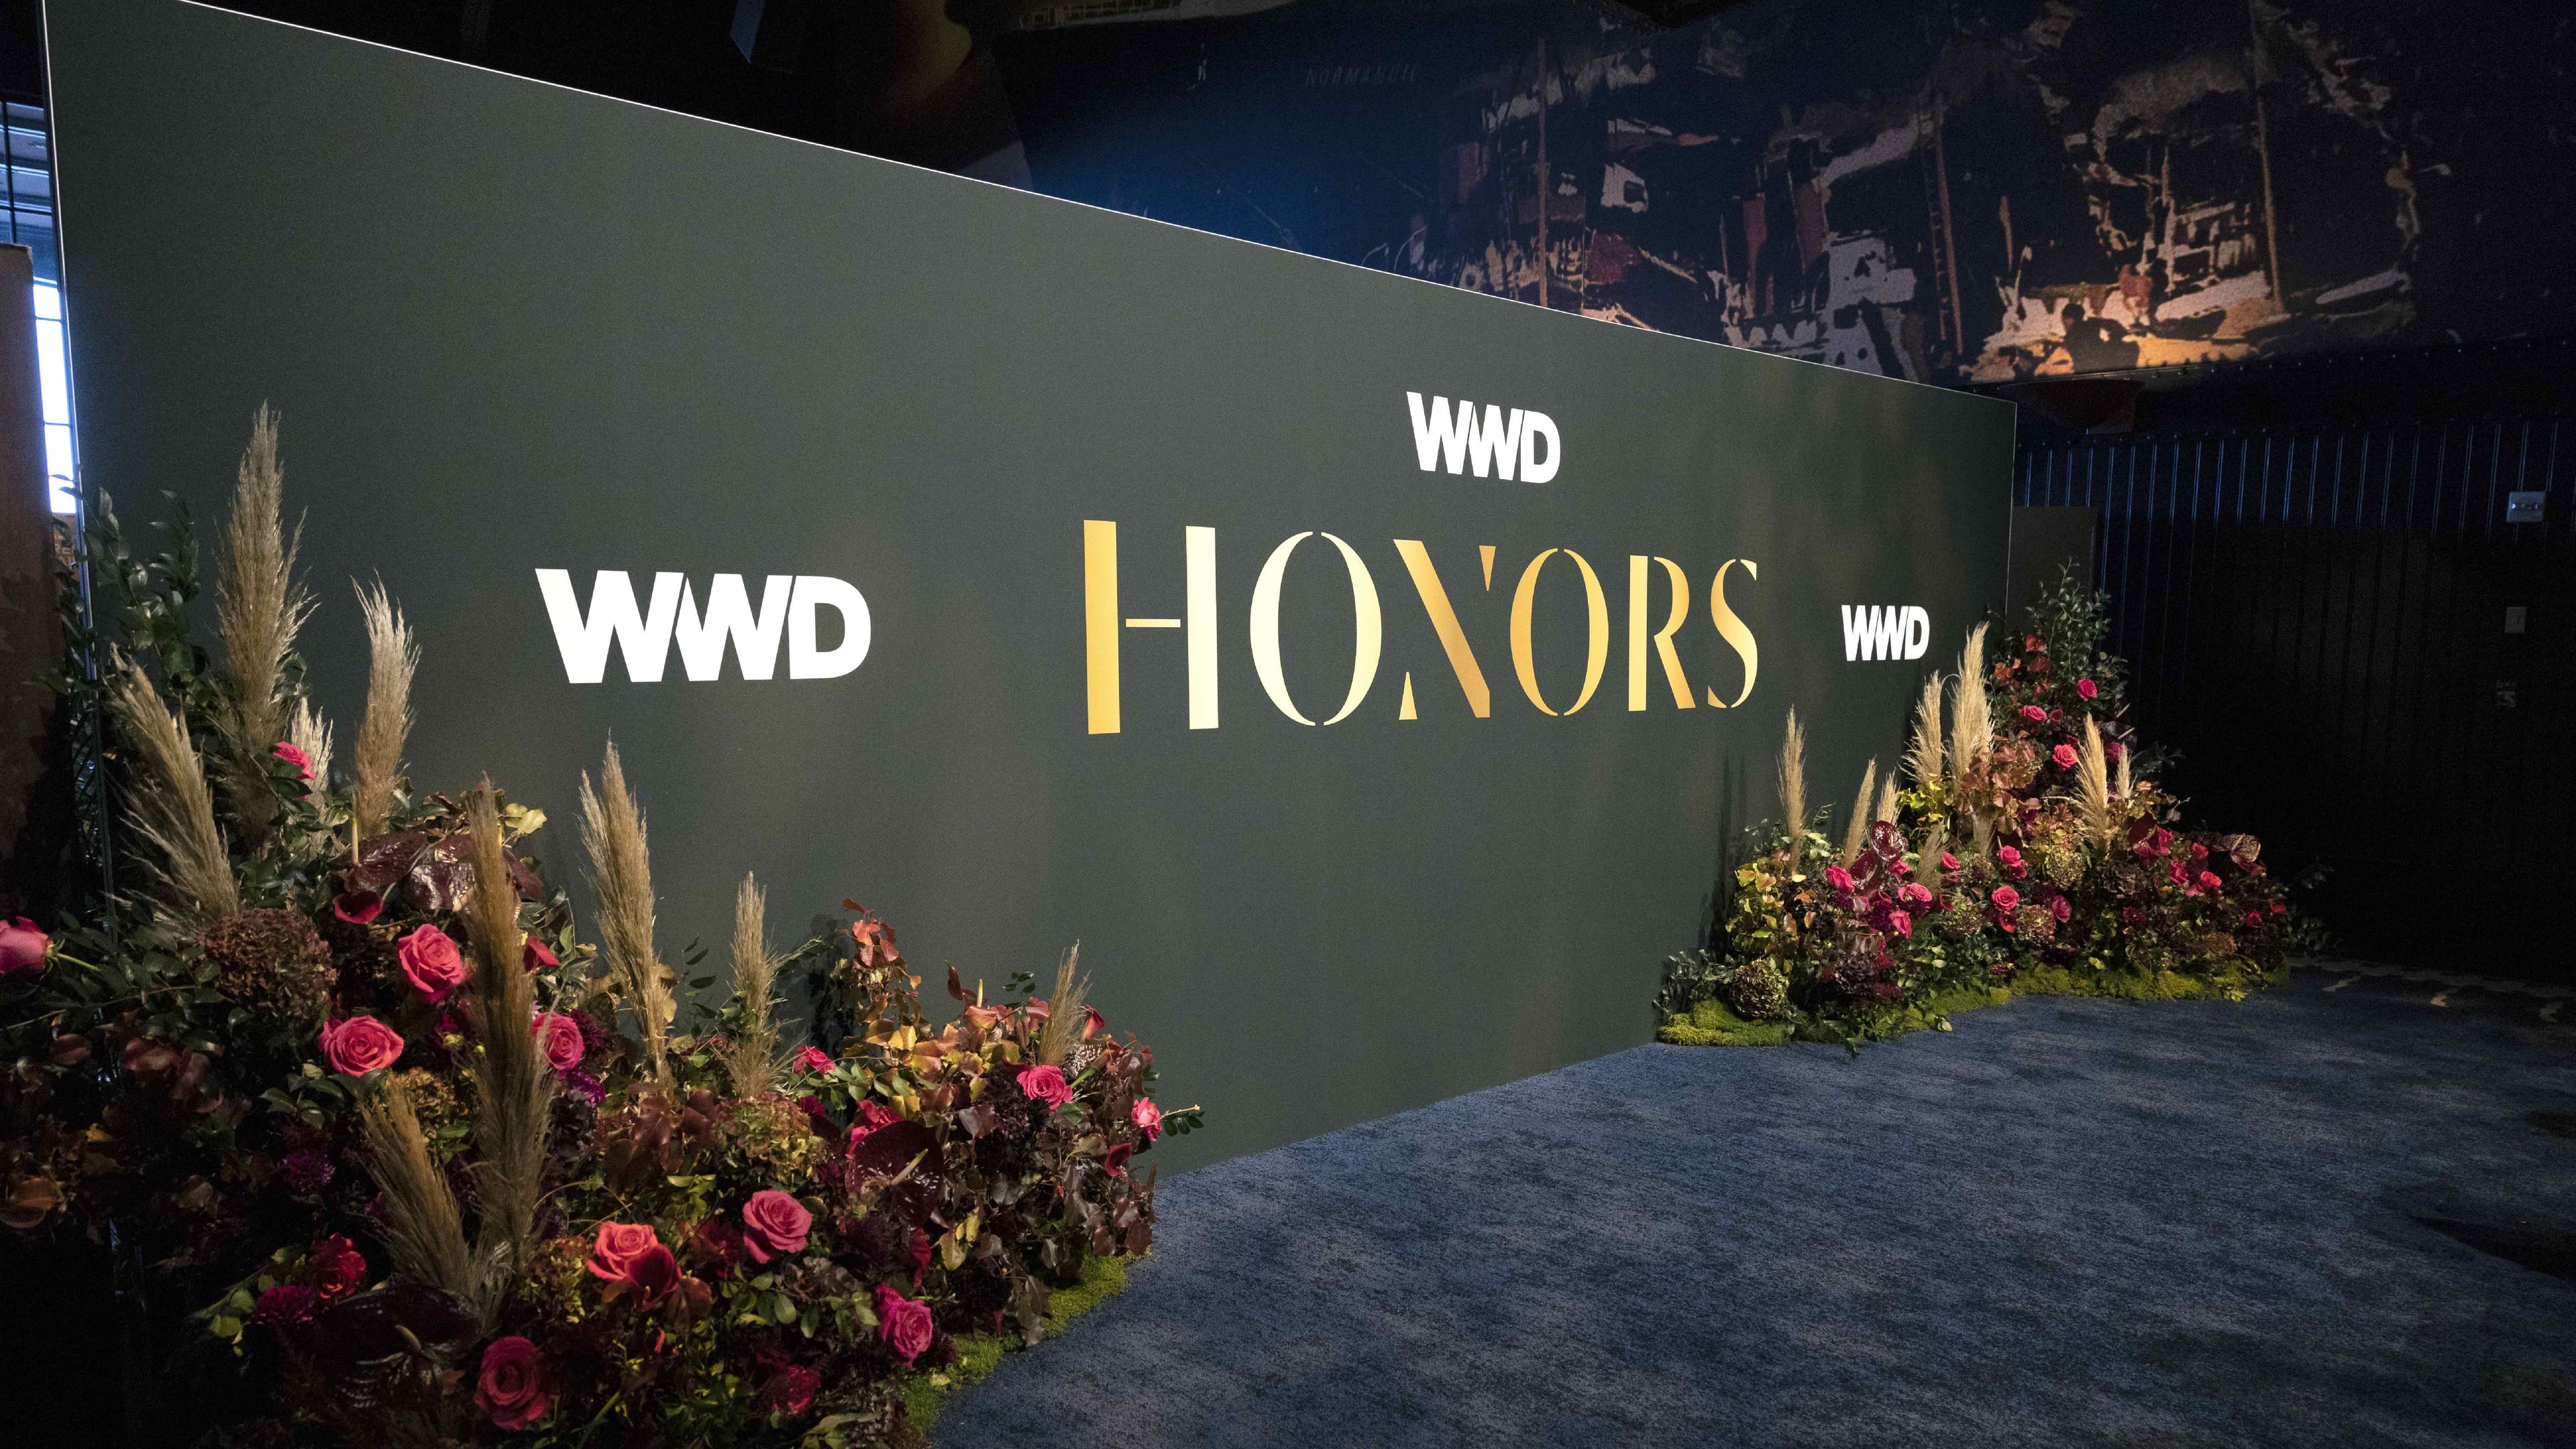 WWD Honors branding on a stage backdrop